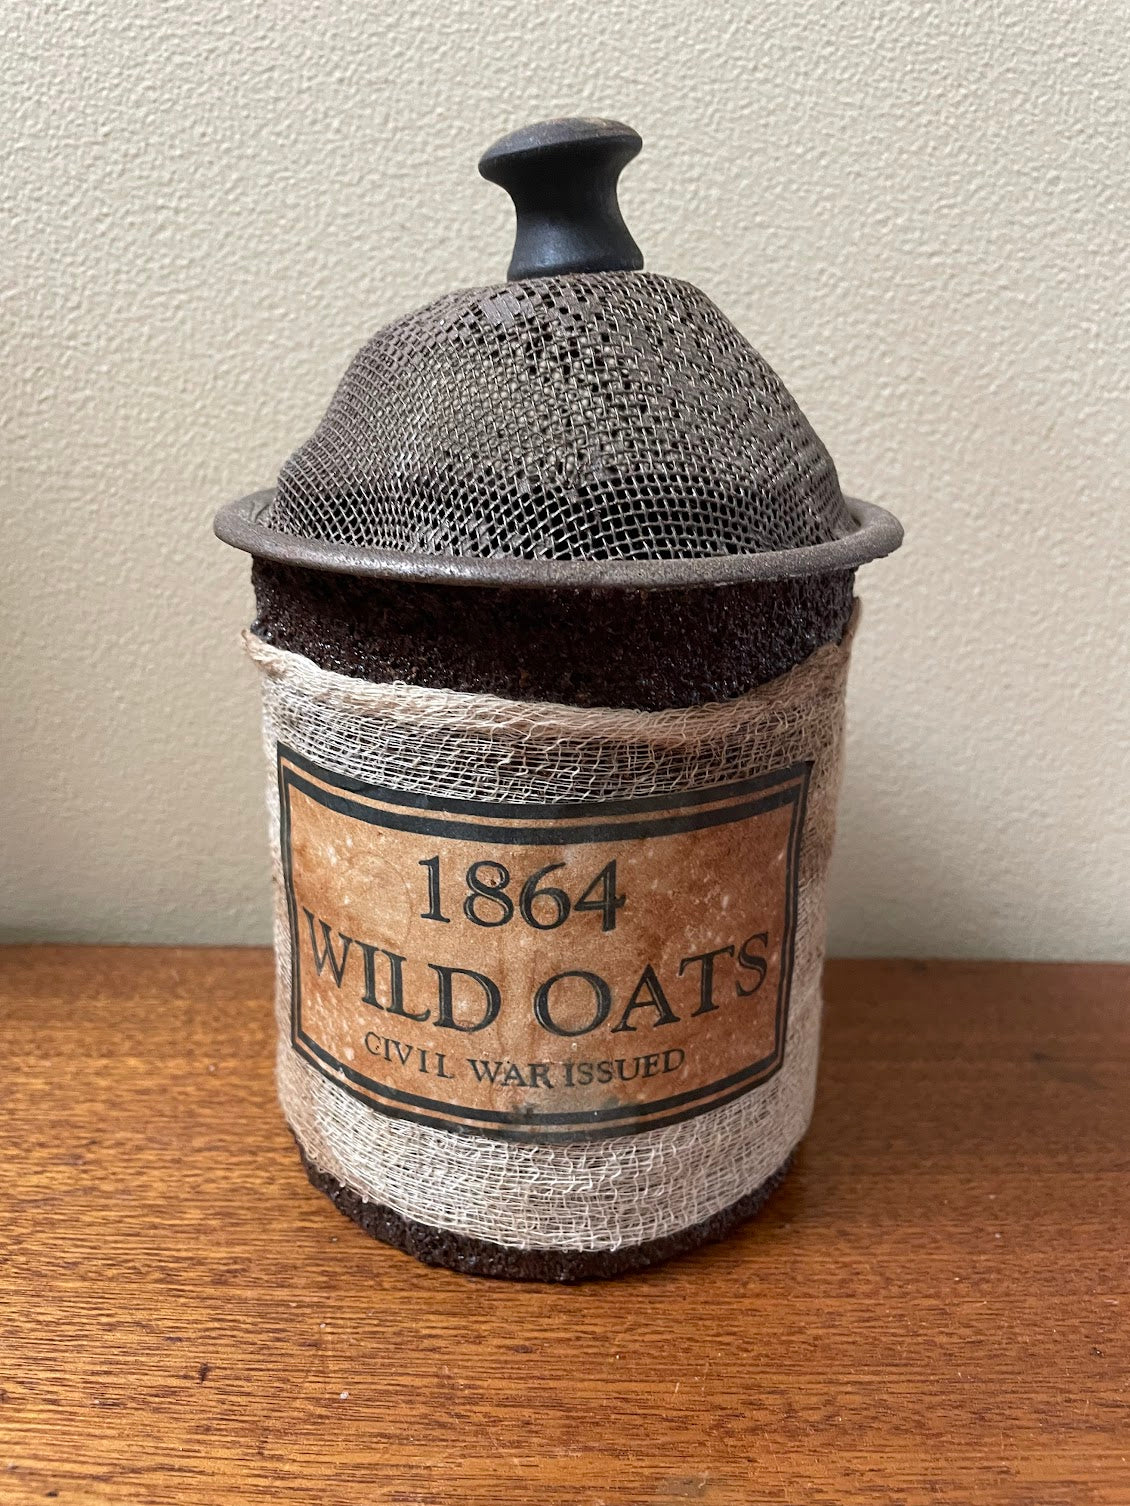 Primitive Handcrafted 1864 Wild Oats with Mesh Dome Lid Jar